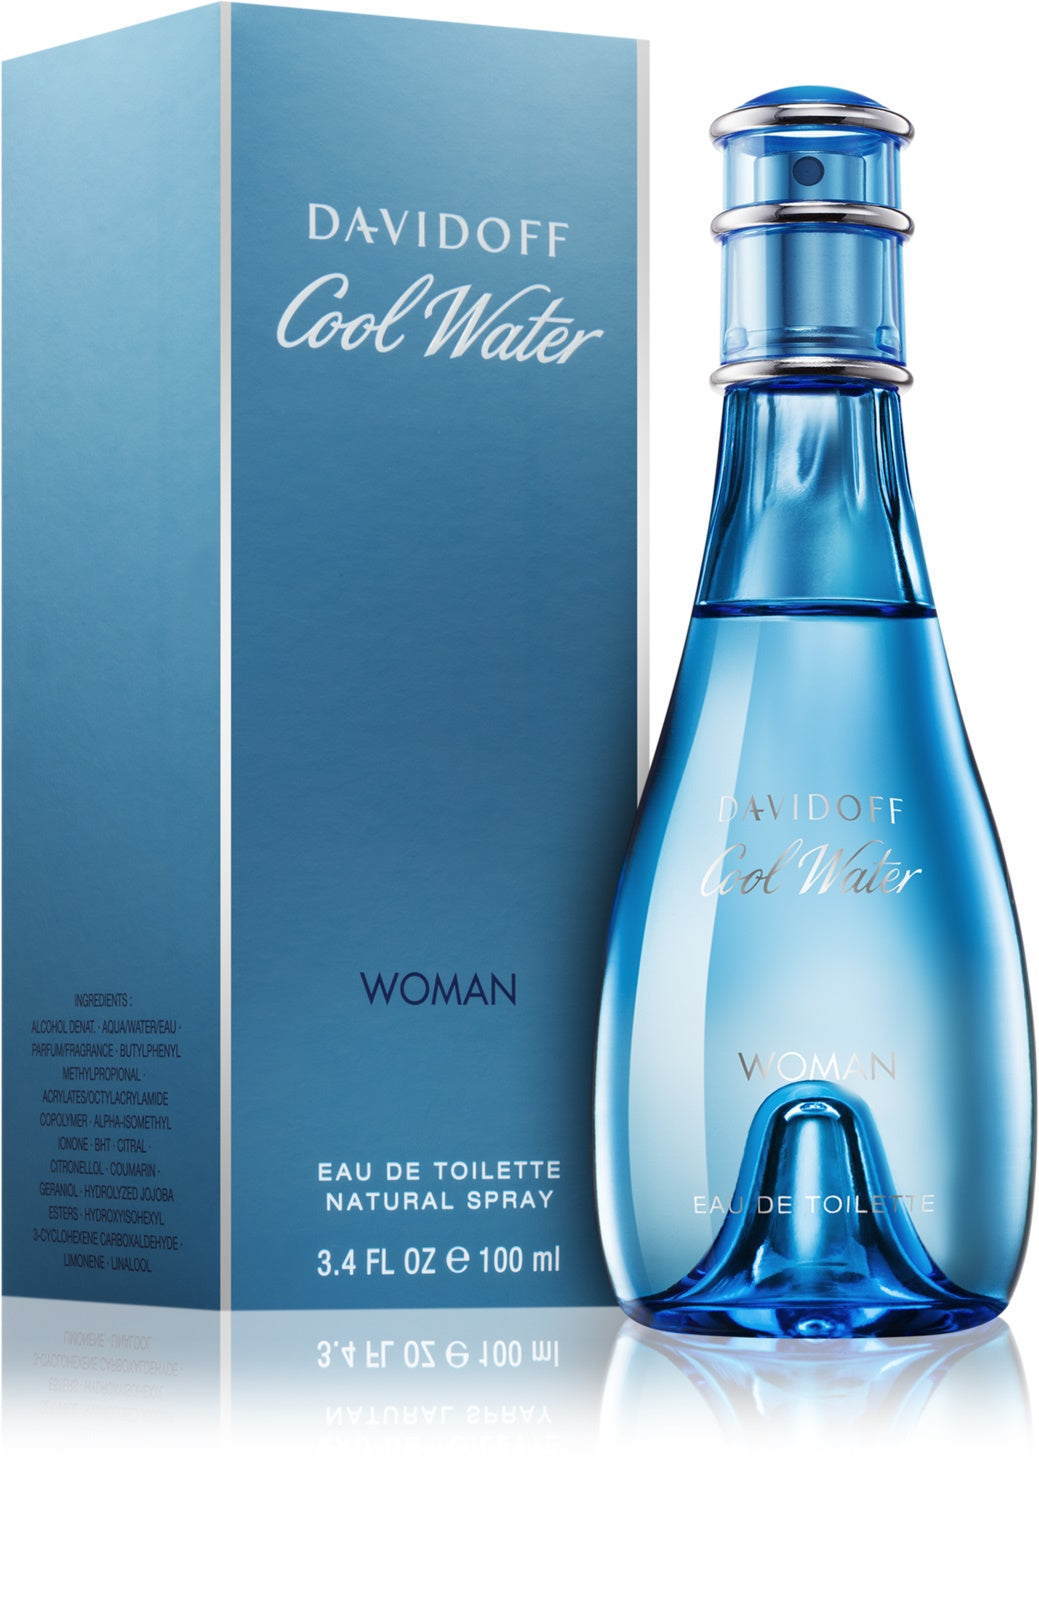 Cool Water Woman EDT - Perfume Planet 